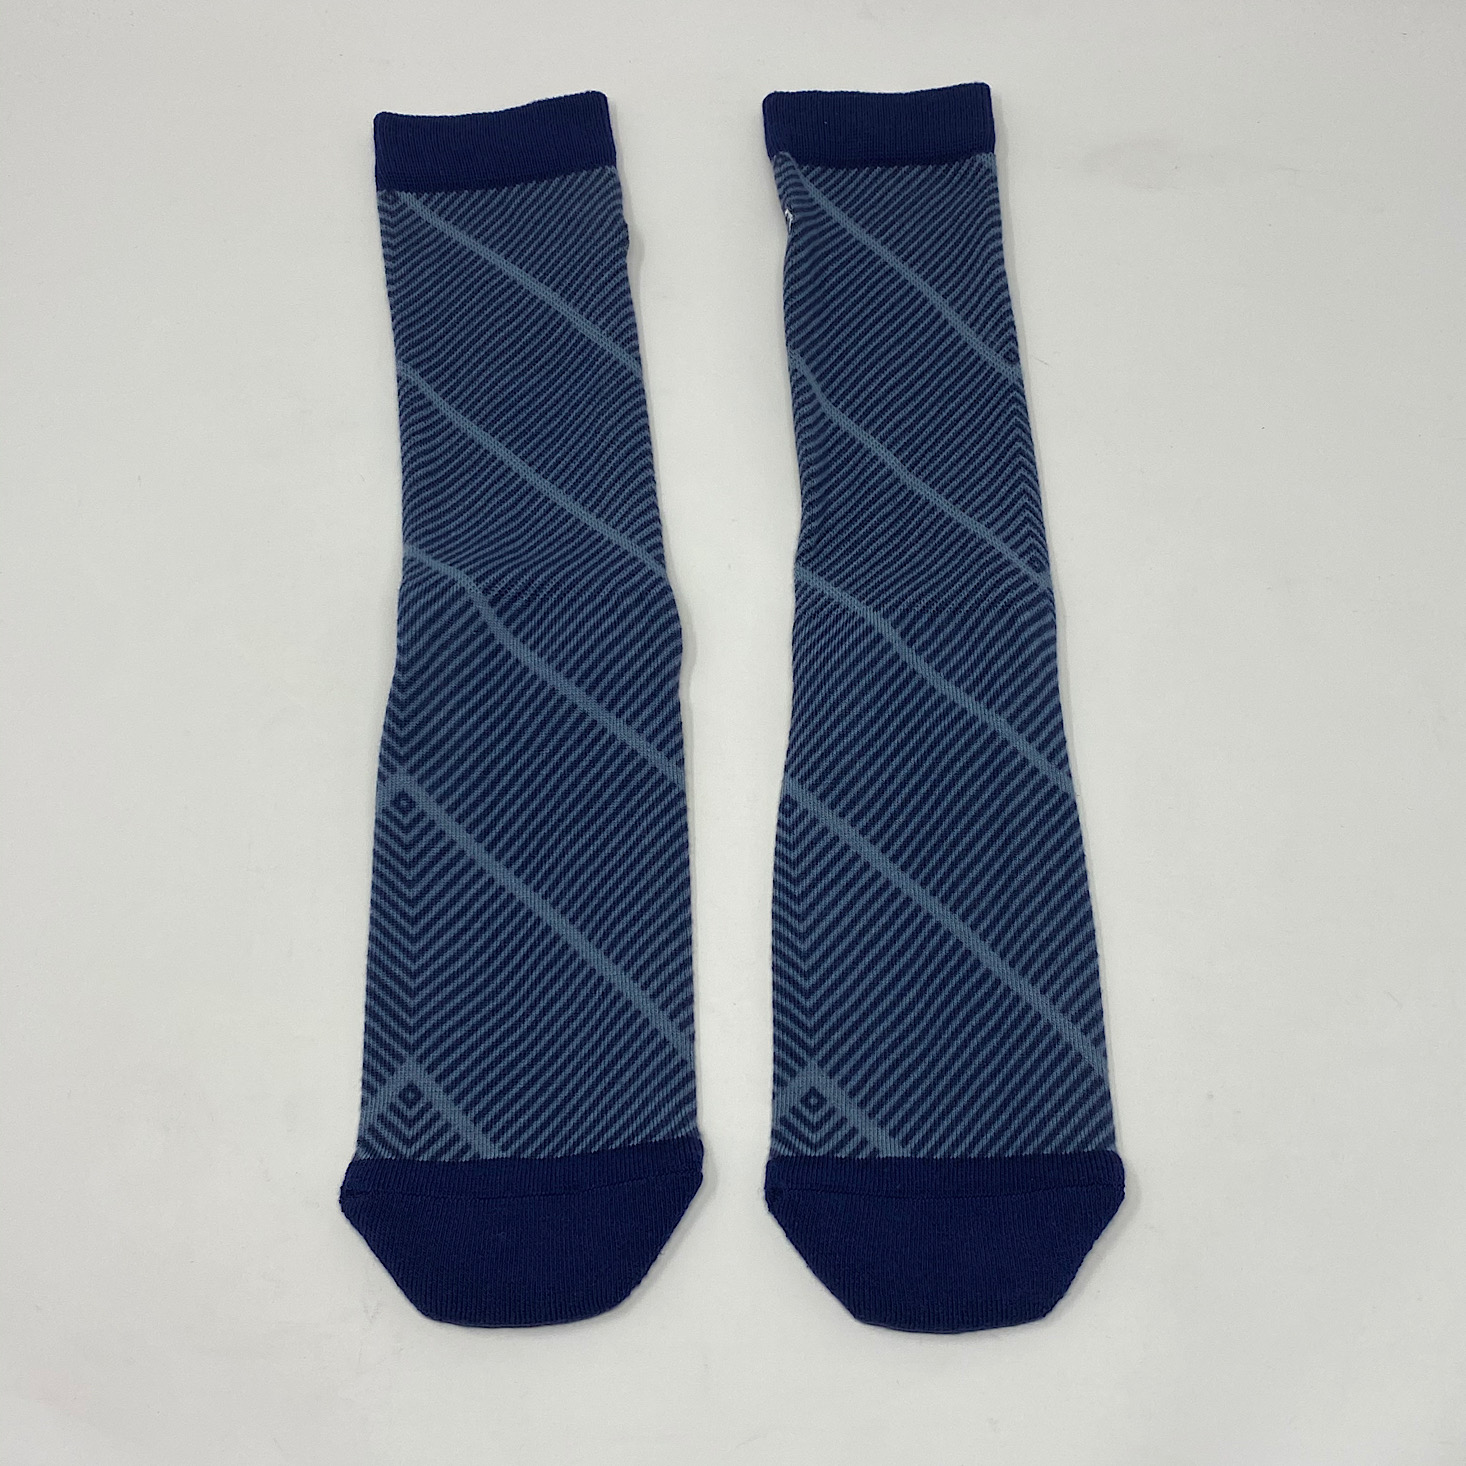 Wohven Socks Subscription Review + Coupon – September 2020